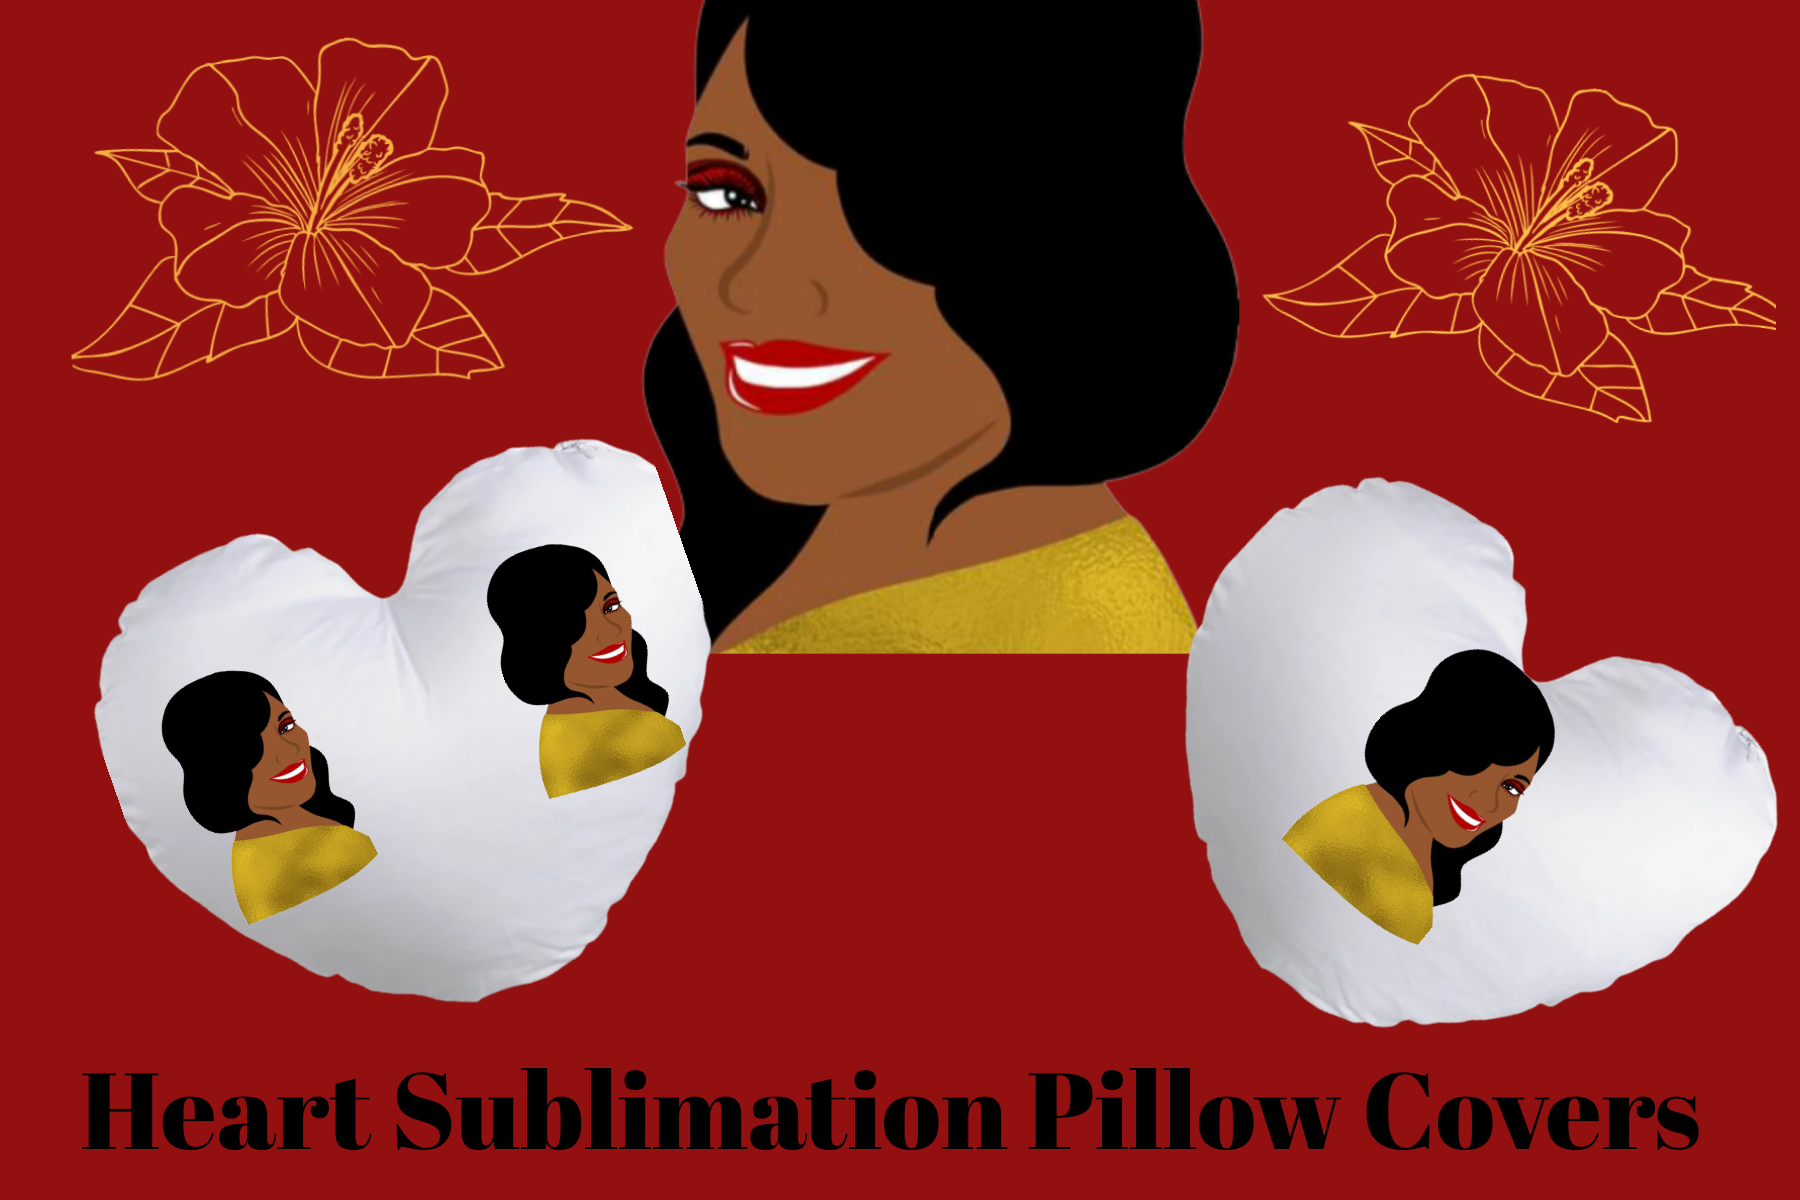 Heart Sublimation Pillow Covers